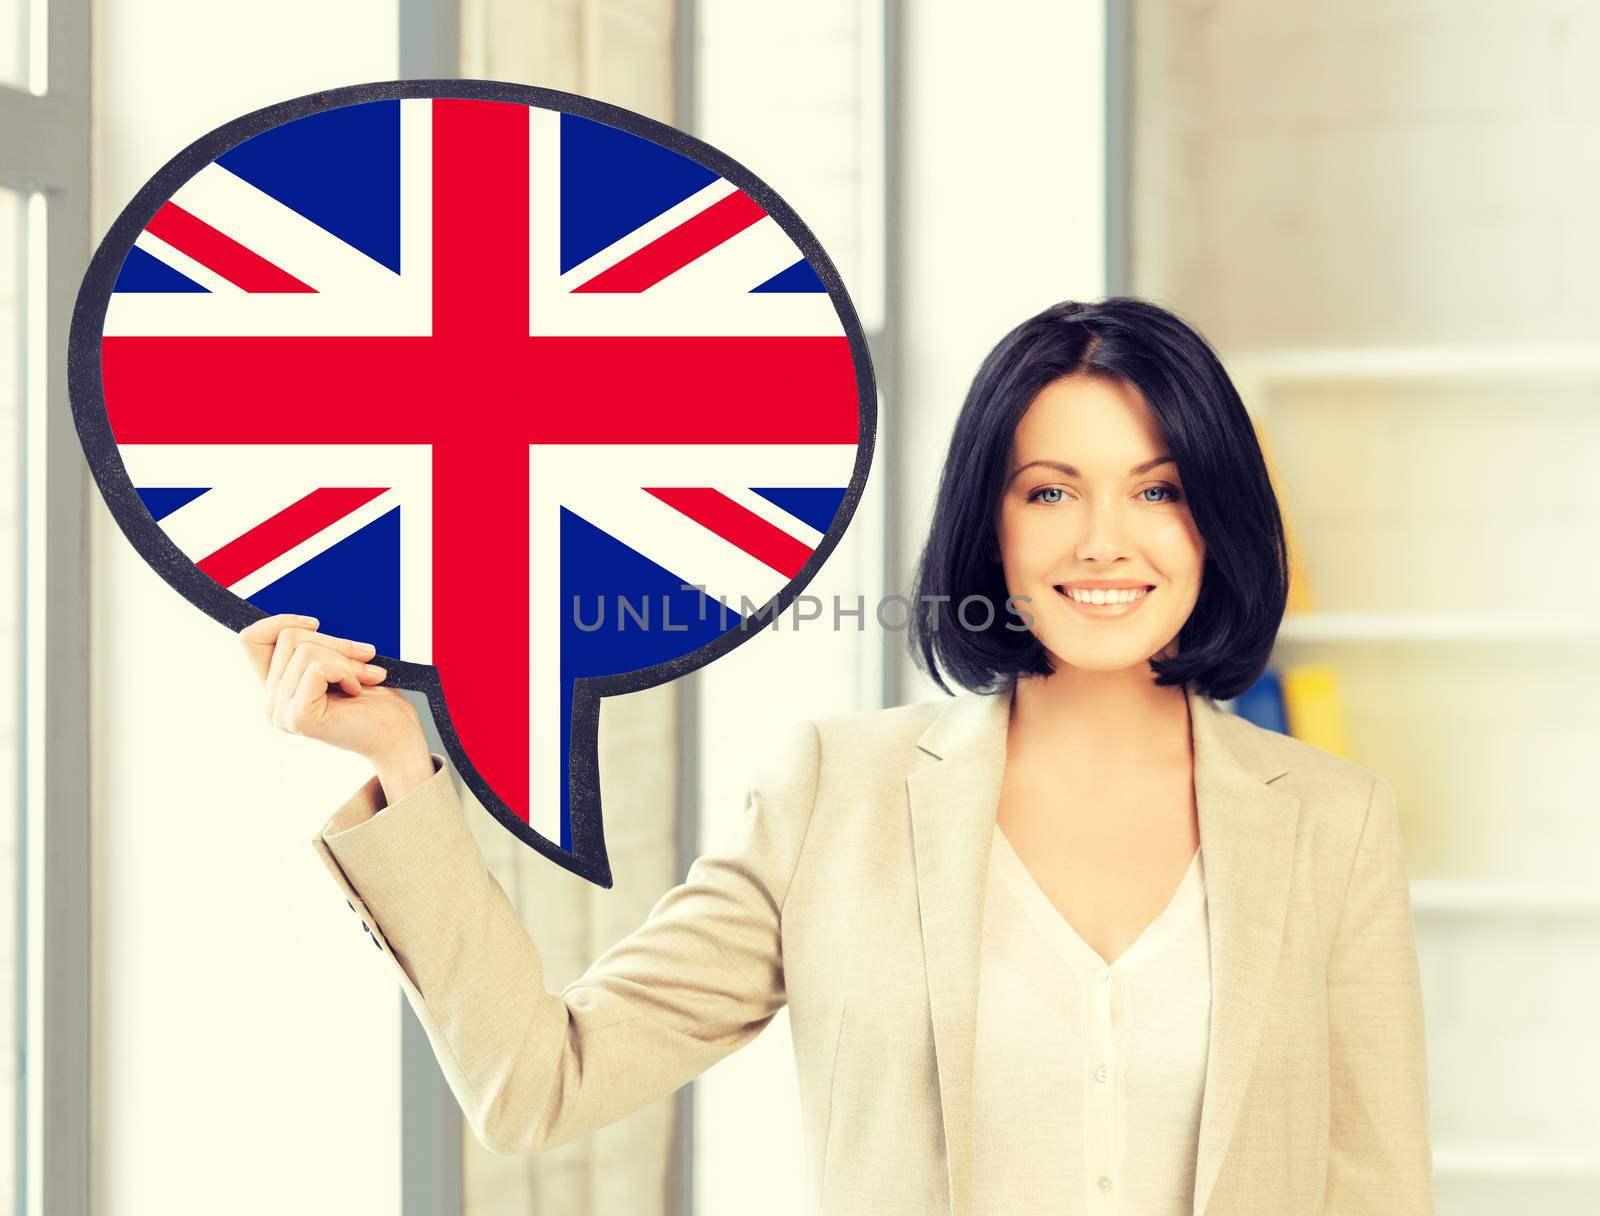 smiling woman with text bubble of british flag by dolgachov